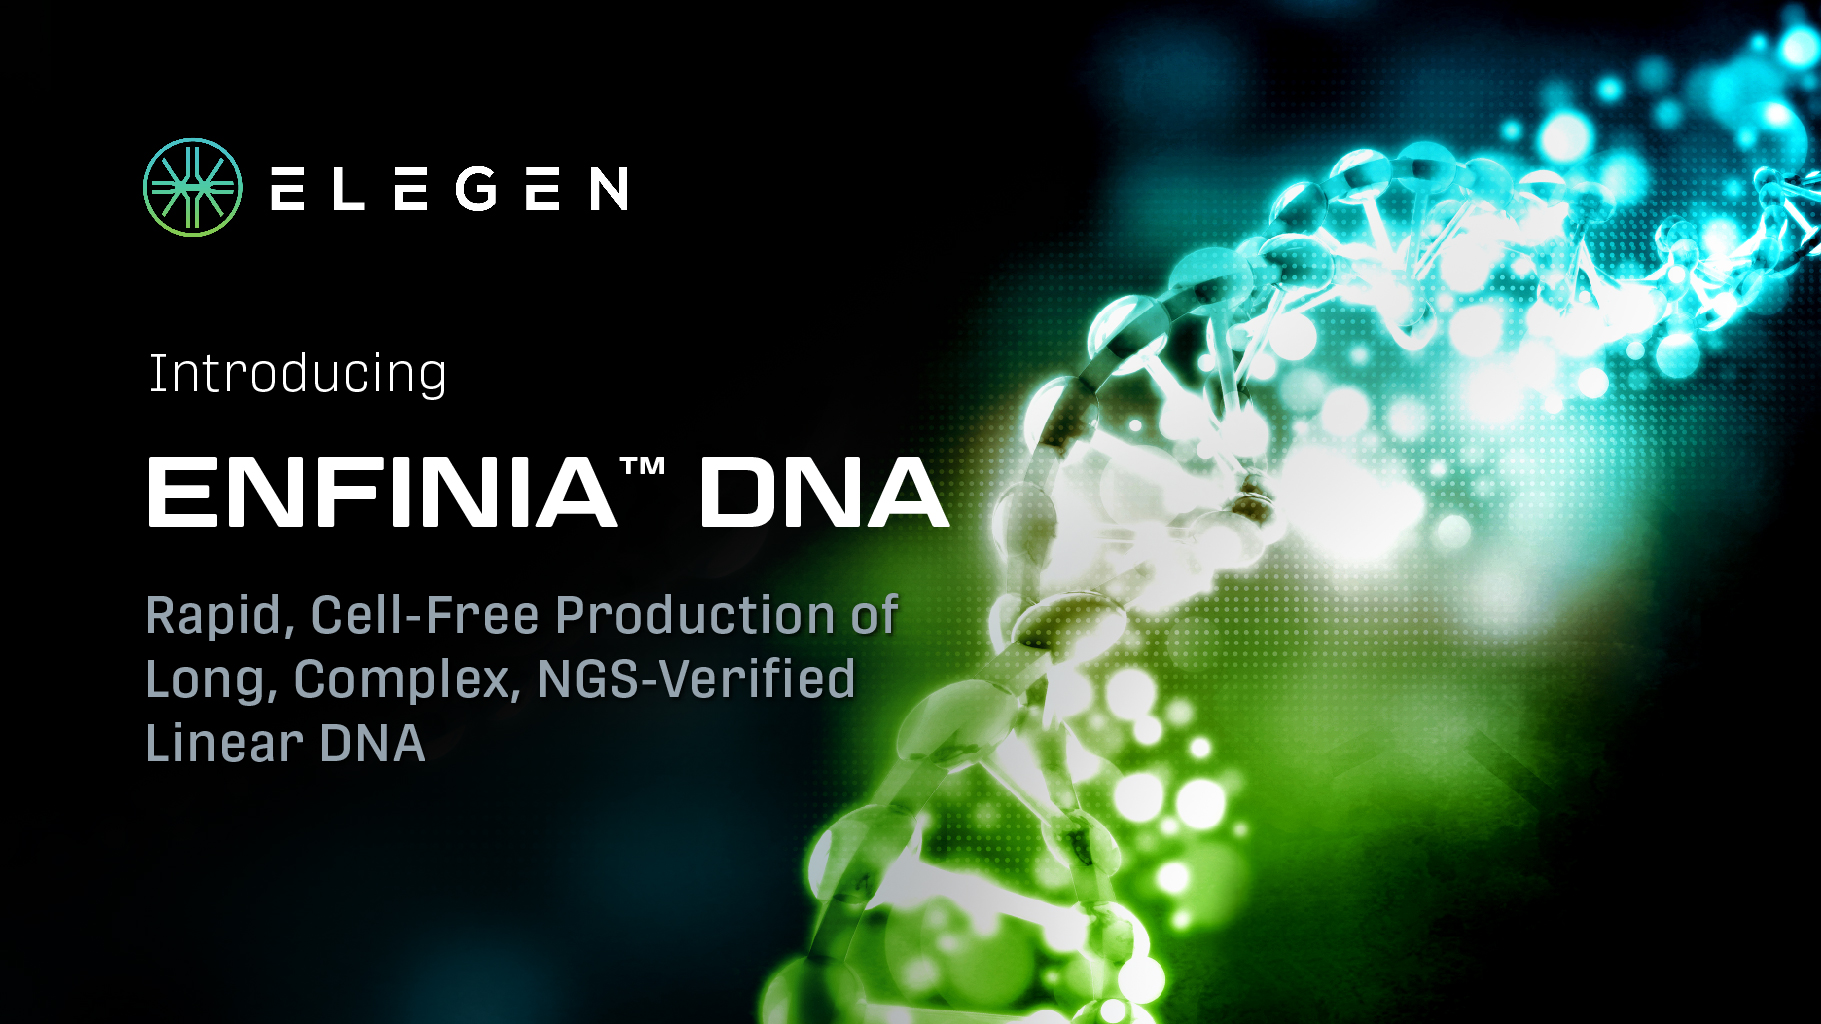 Video Introducing ENFINIA Linear DNA, Cell Free DNA Synthesis